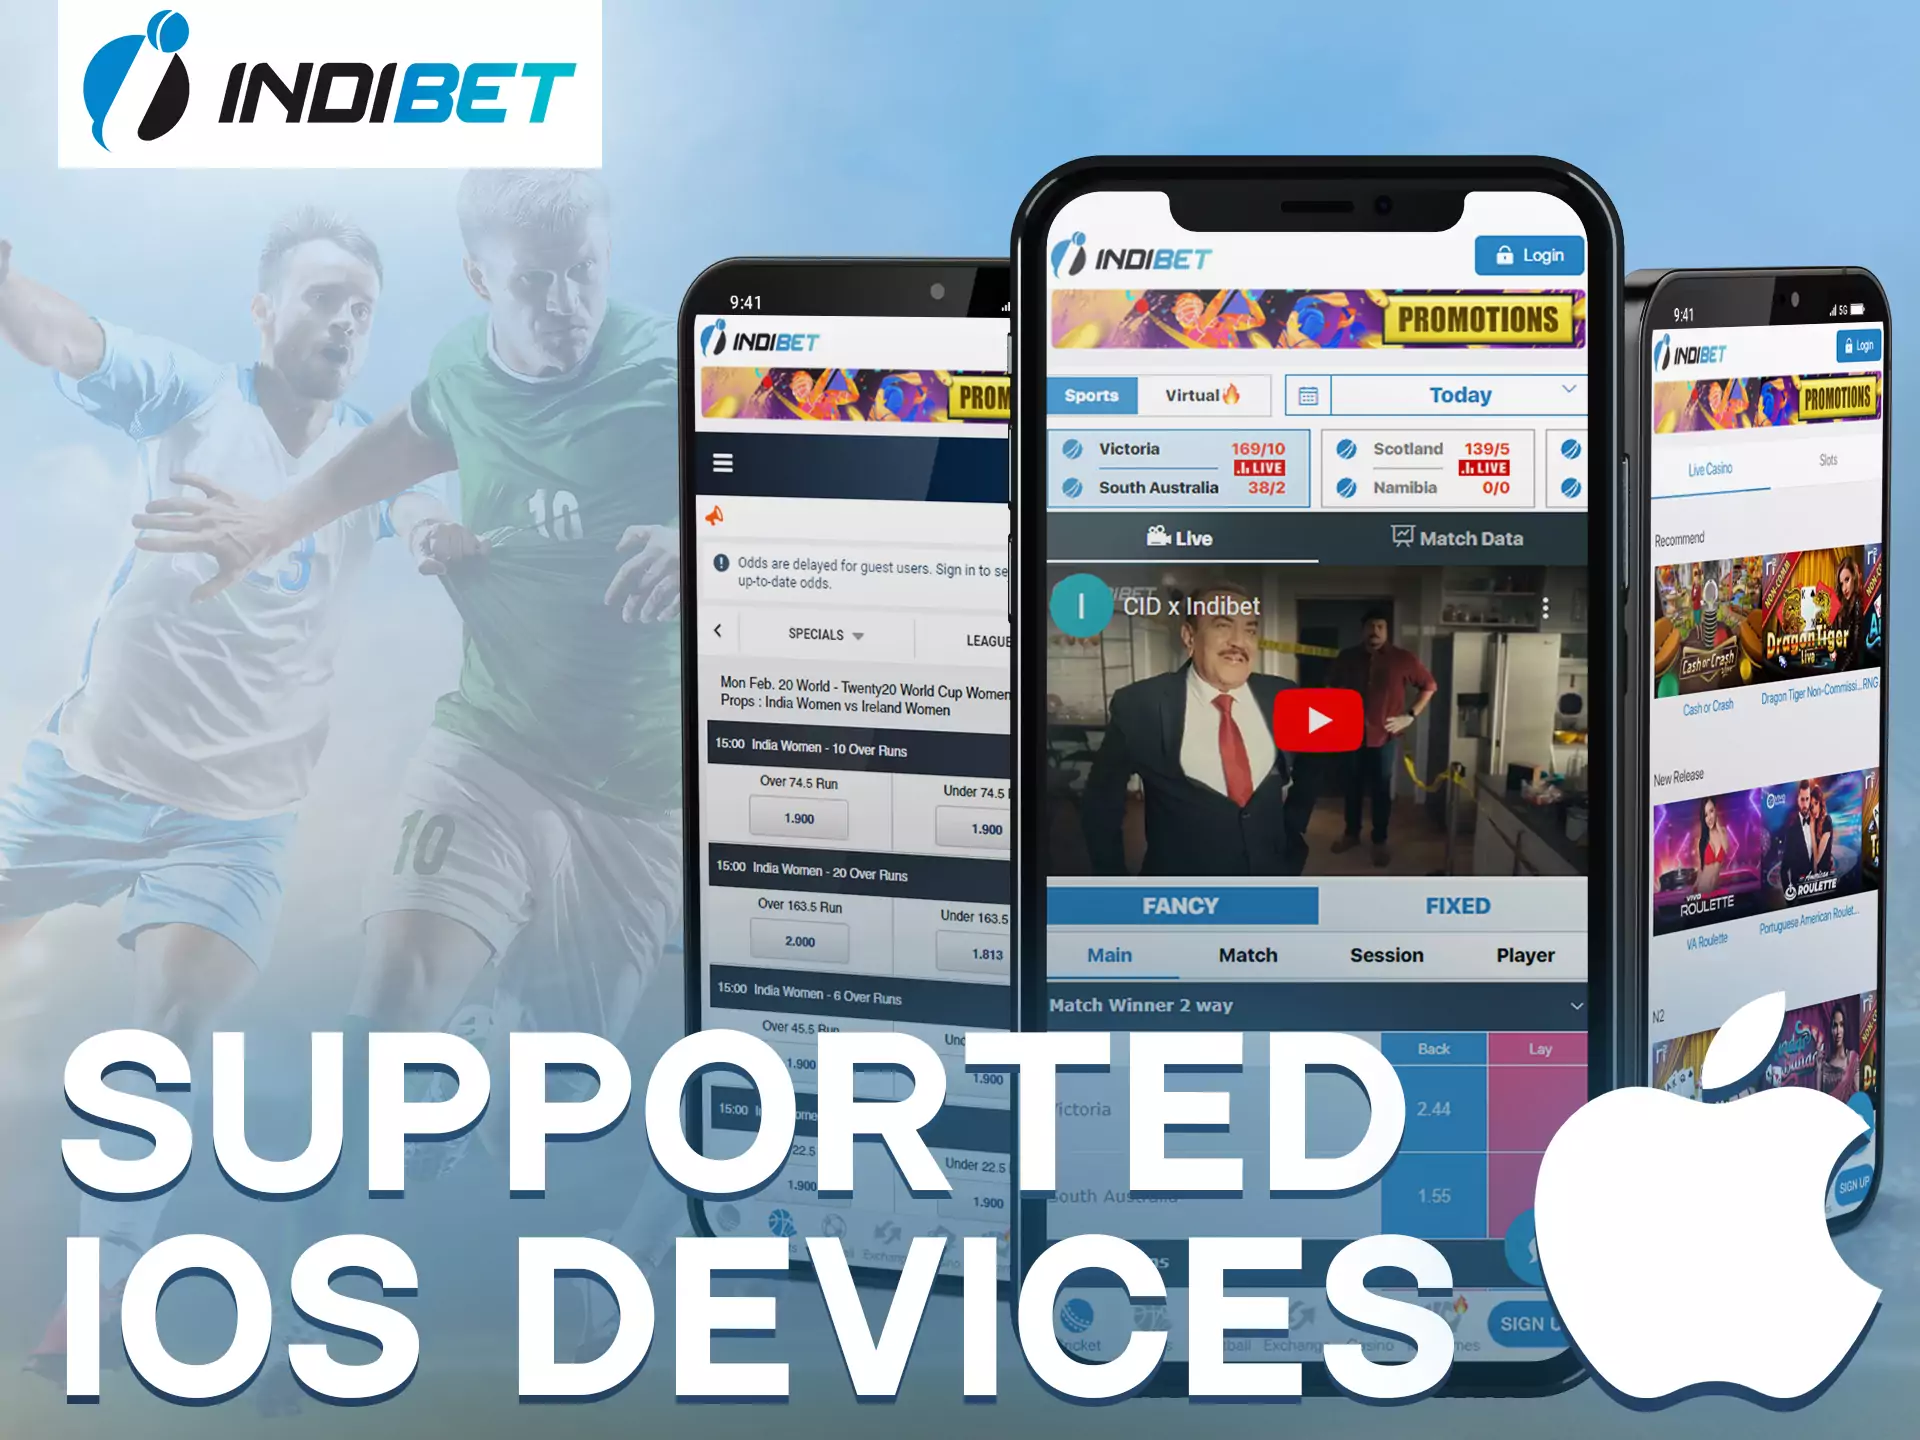 Indibet iOS app supported by many iOS devices.